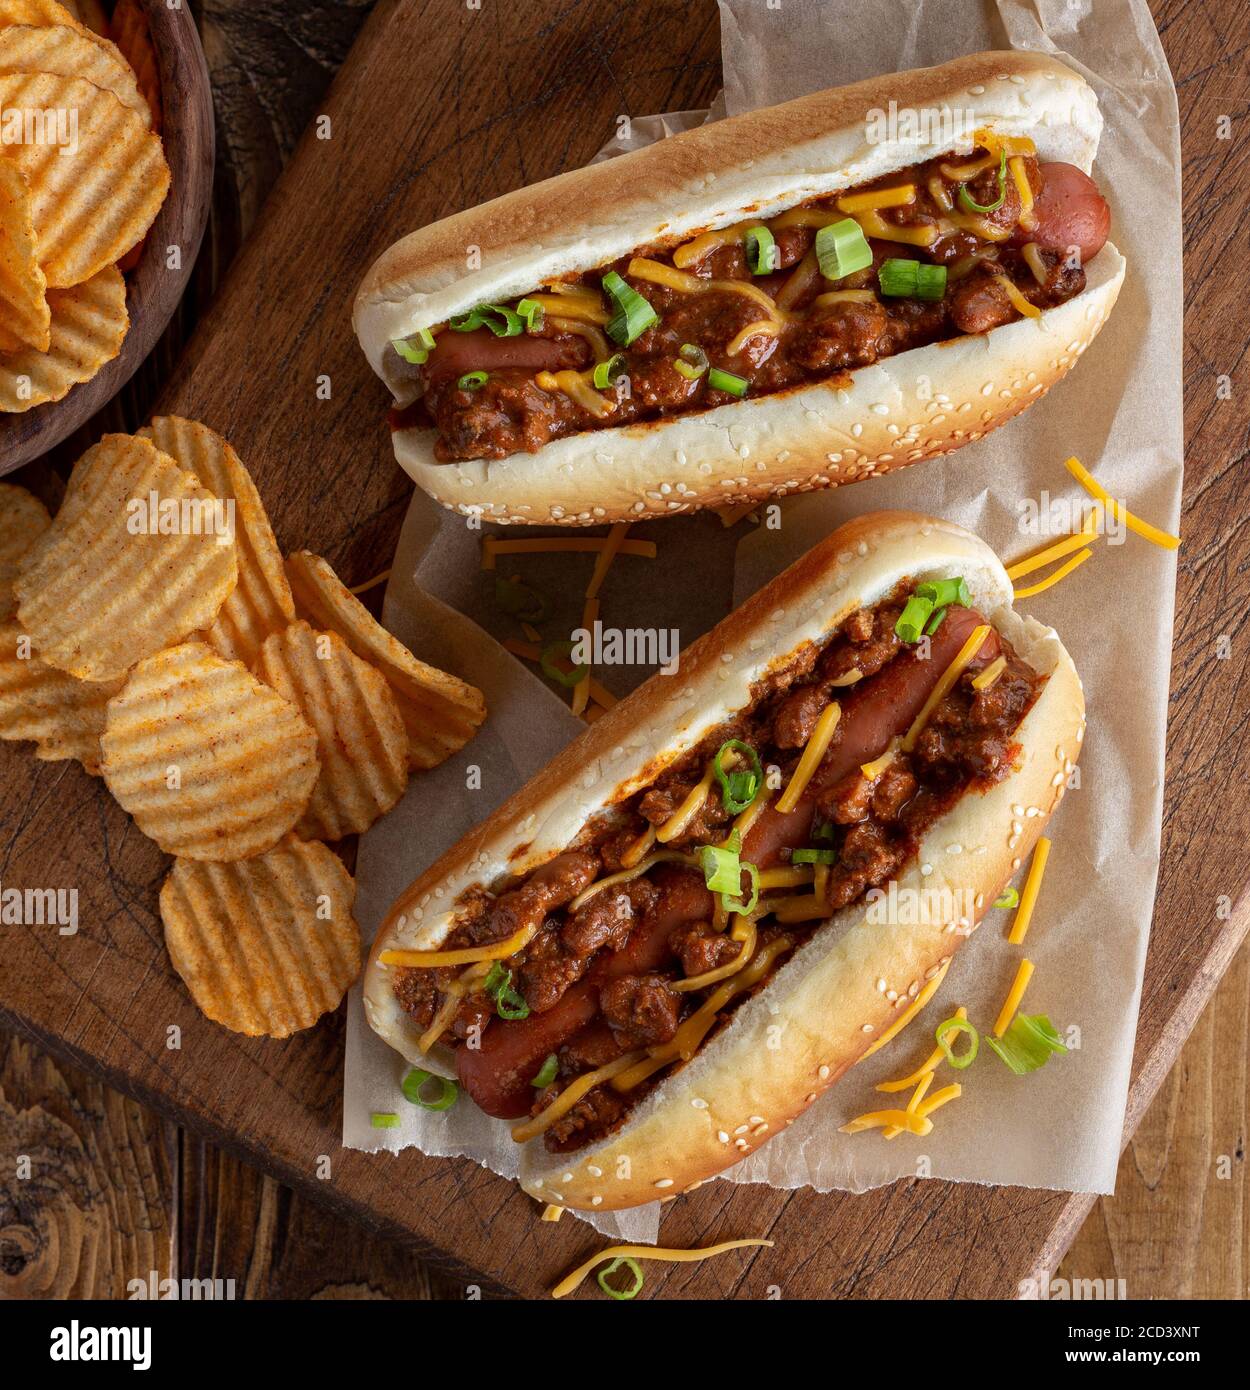 Chili hot dog with cheddar cheese and green onions on a sesame seed bun with potato chips on a rustic wooden board Stock Photo